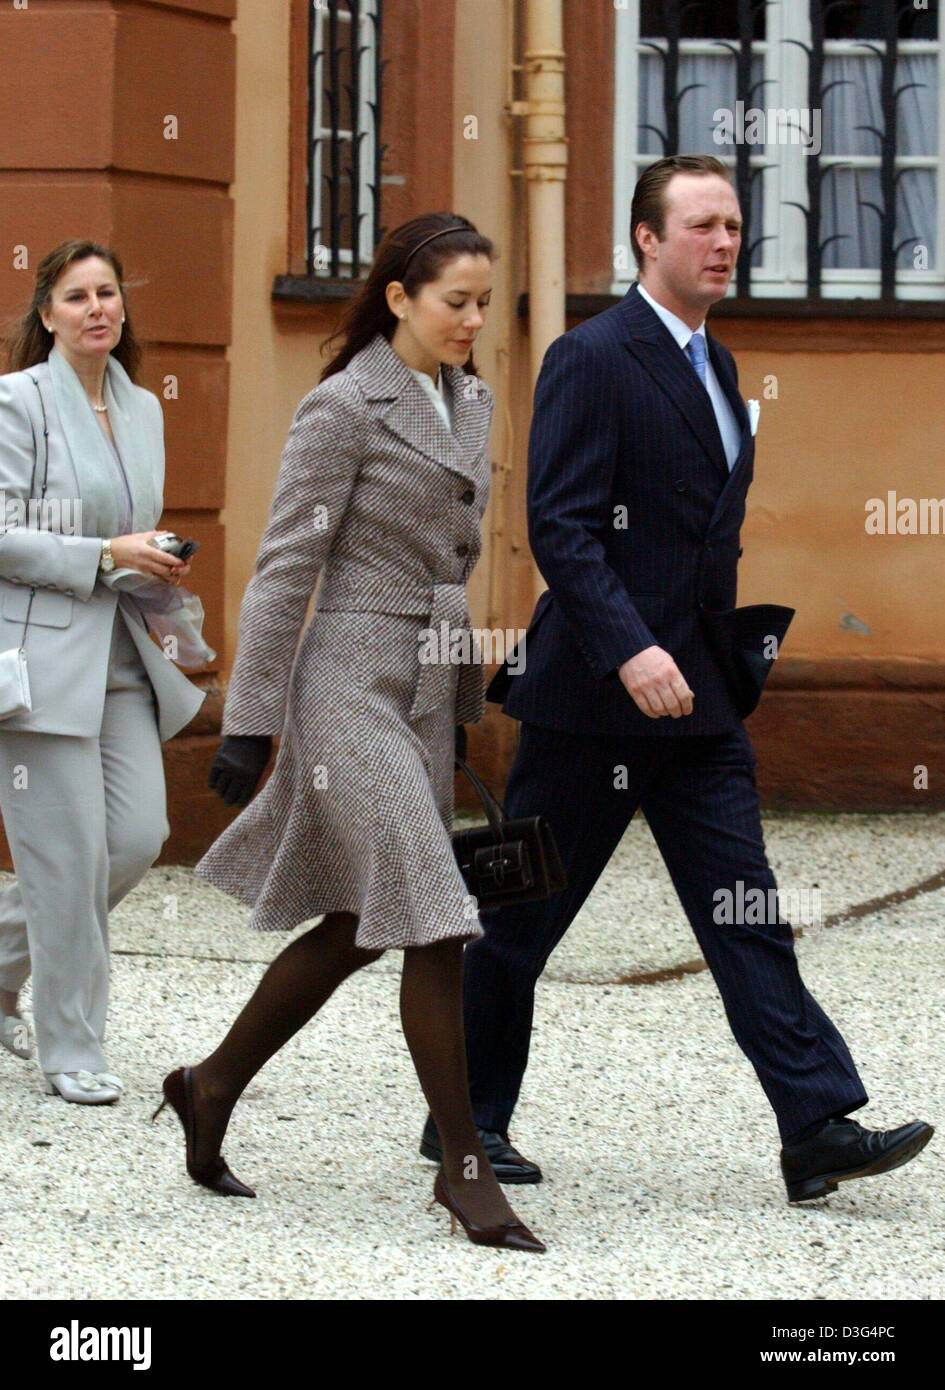 (dpa) - Mary Donaldson, the fiancee of Crown Prince Frederik of Denmark, and Prince Gustav von Berleburg arrive for the baptism of Countess Ingrid at Berleburg Castle in Bad Berleburg, Germany, 13 December 2003. The baby was born on 16 August 2003 in Copenhagen and was given the name Countess Ingrid Alexandra Irma Astrid Benedikte von Pfeil and Klein-Ellguth. Her parents are Jeffer Stock Photo